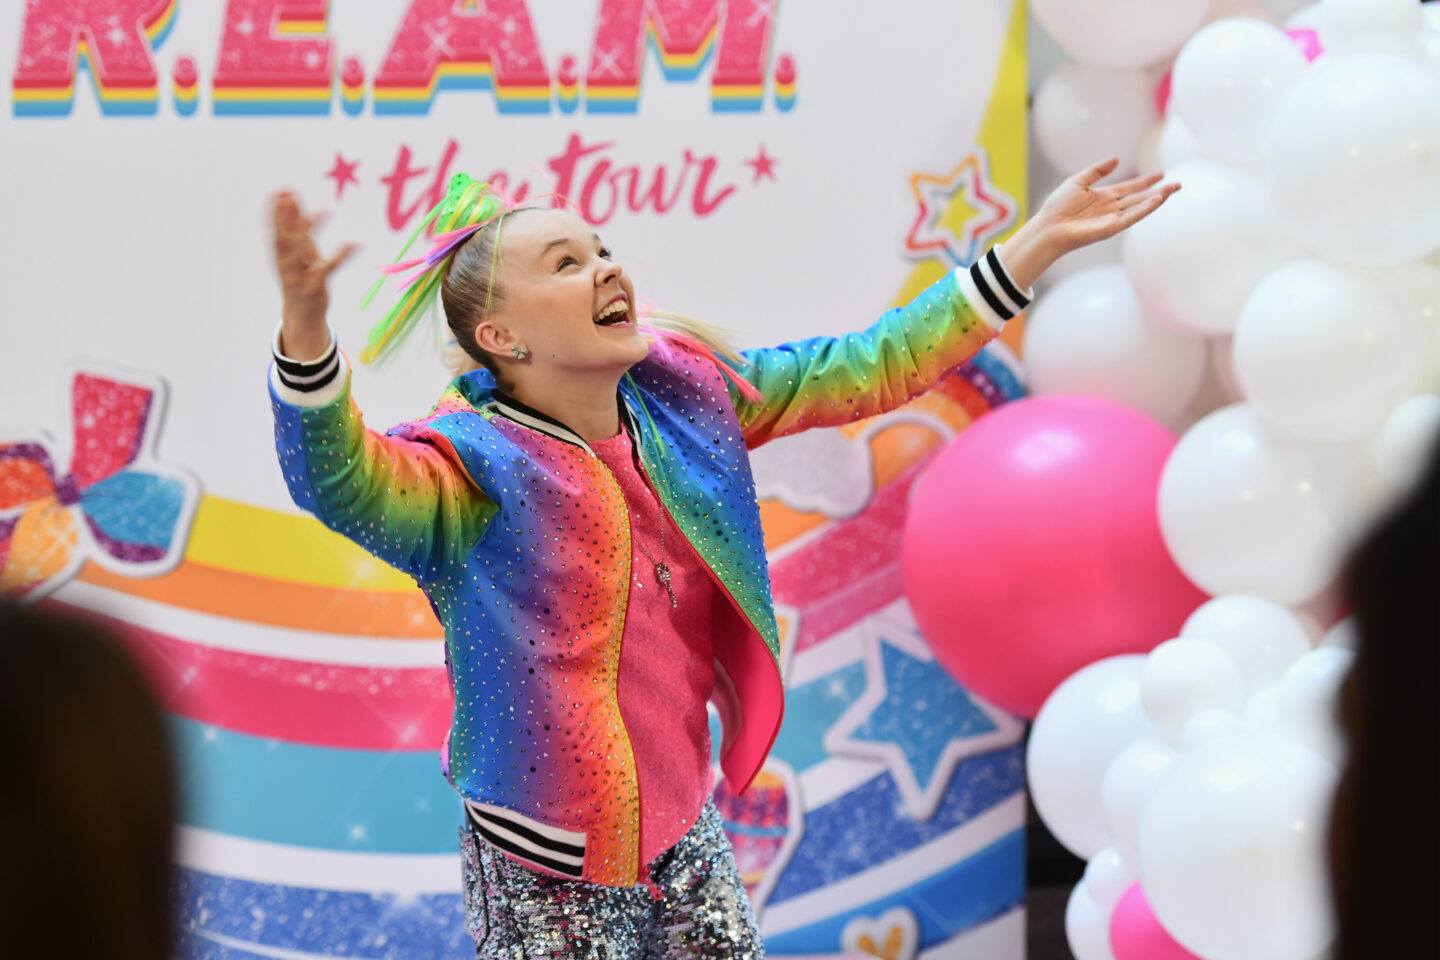 Importance of JoJo Siwa's Queer Representation - Motherly